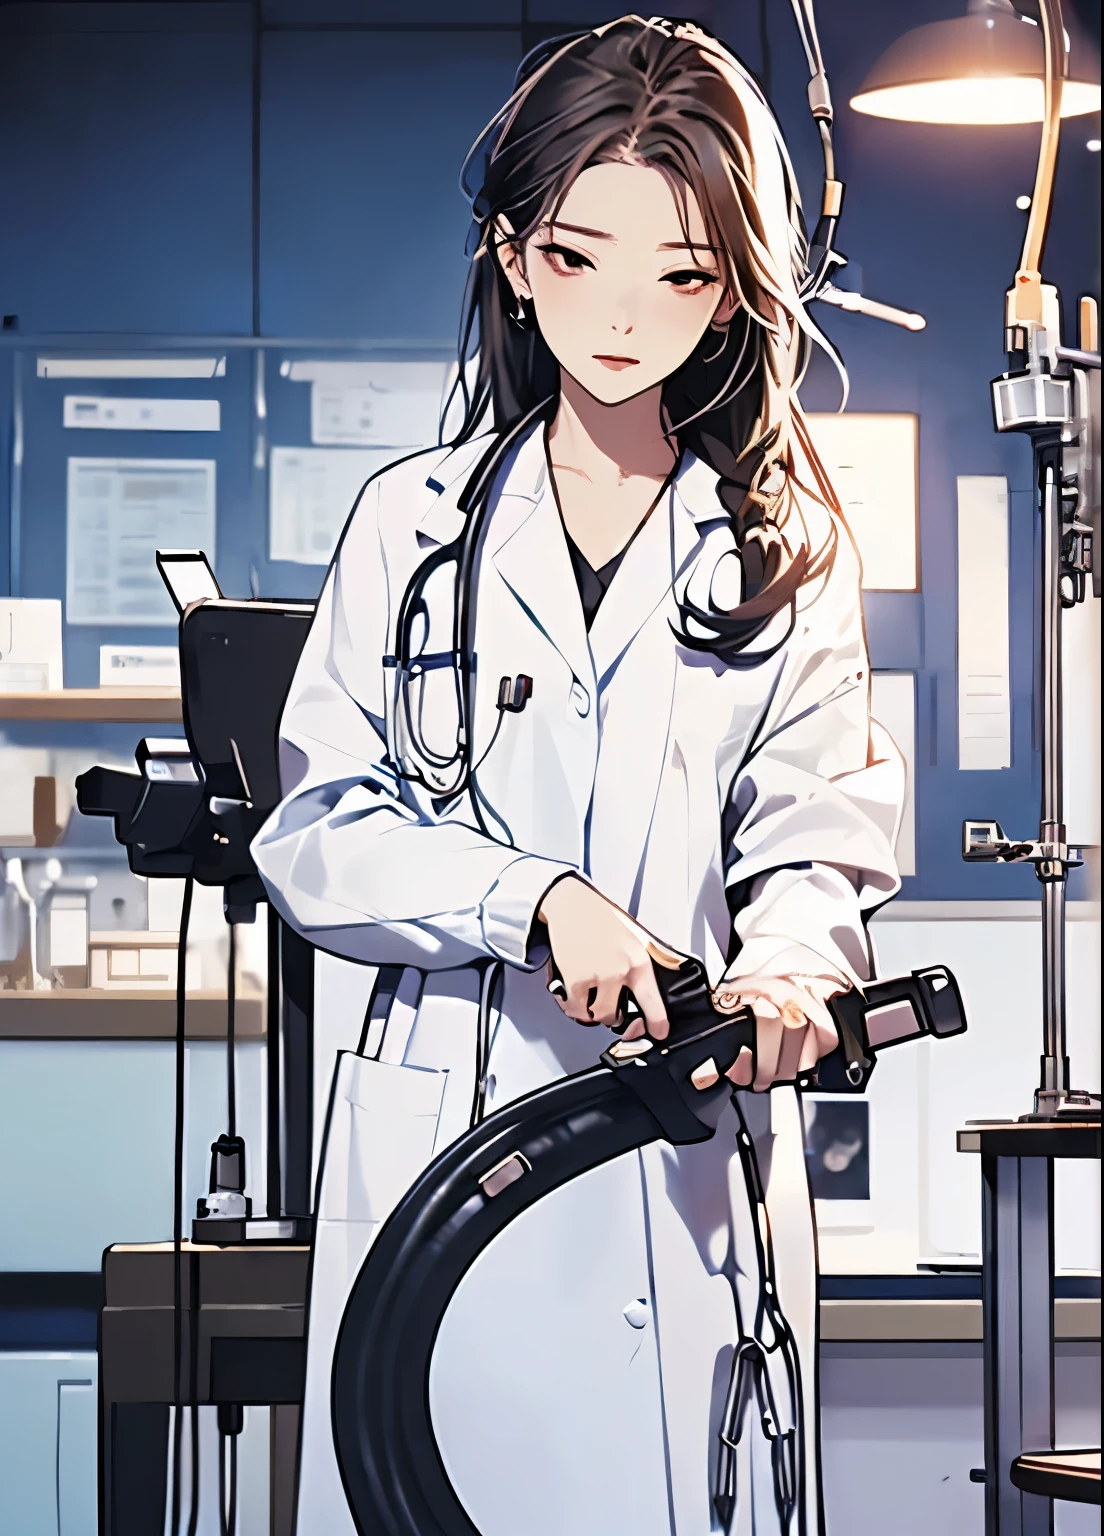 (((masterpiece))) (((nsfw:hentai))) ((( background : creepy laboratory : operating table : horror theme : high quality : detail ))) ((( character : Lee Ji Eun : fit body : small breast : smooth hair : naked : closed eyes : experiment body : wires attached to body : laying on operating table)))